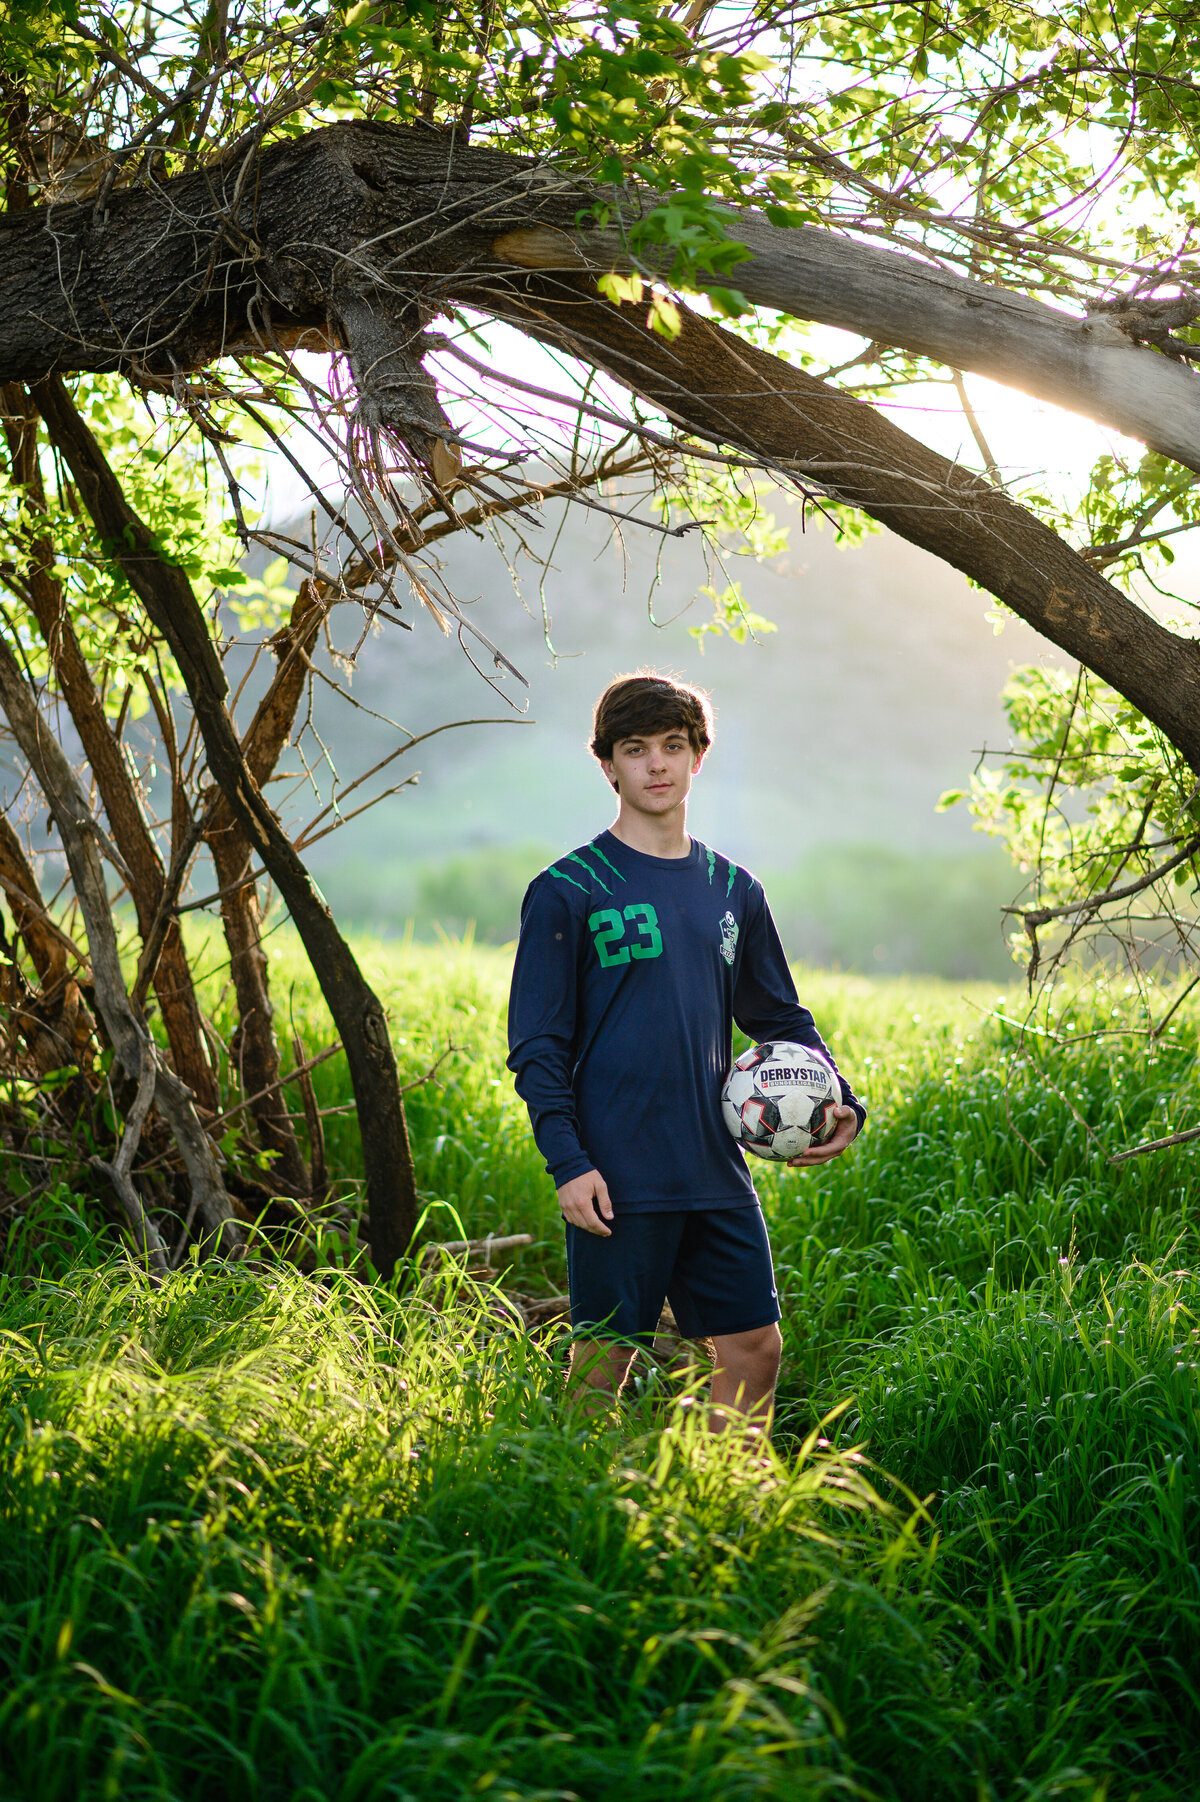 denver senior photographer photographs outdoor senior pictures with young man in his soccer uniform and soccer ball for his senior photos yearbook